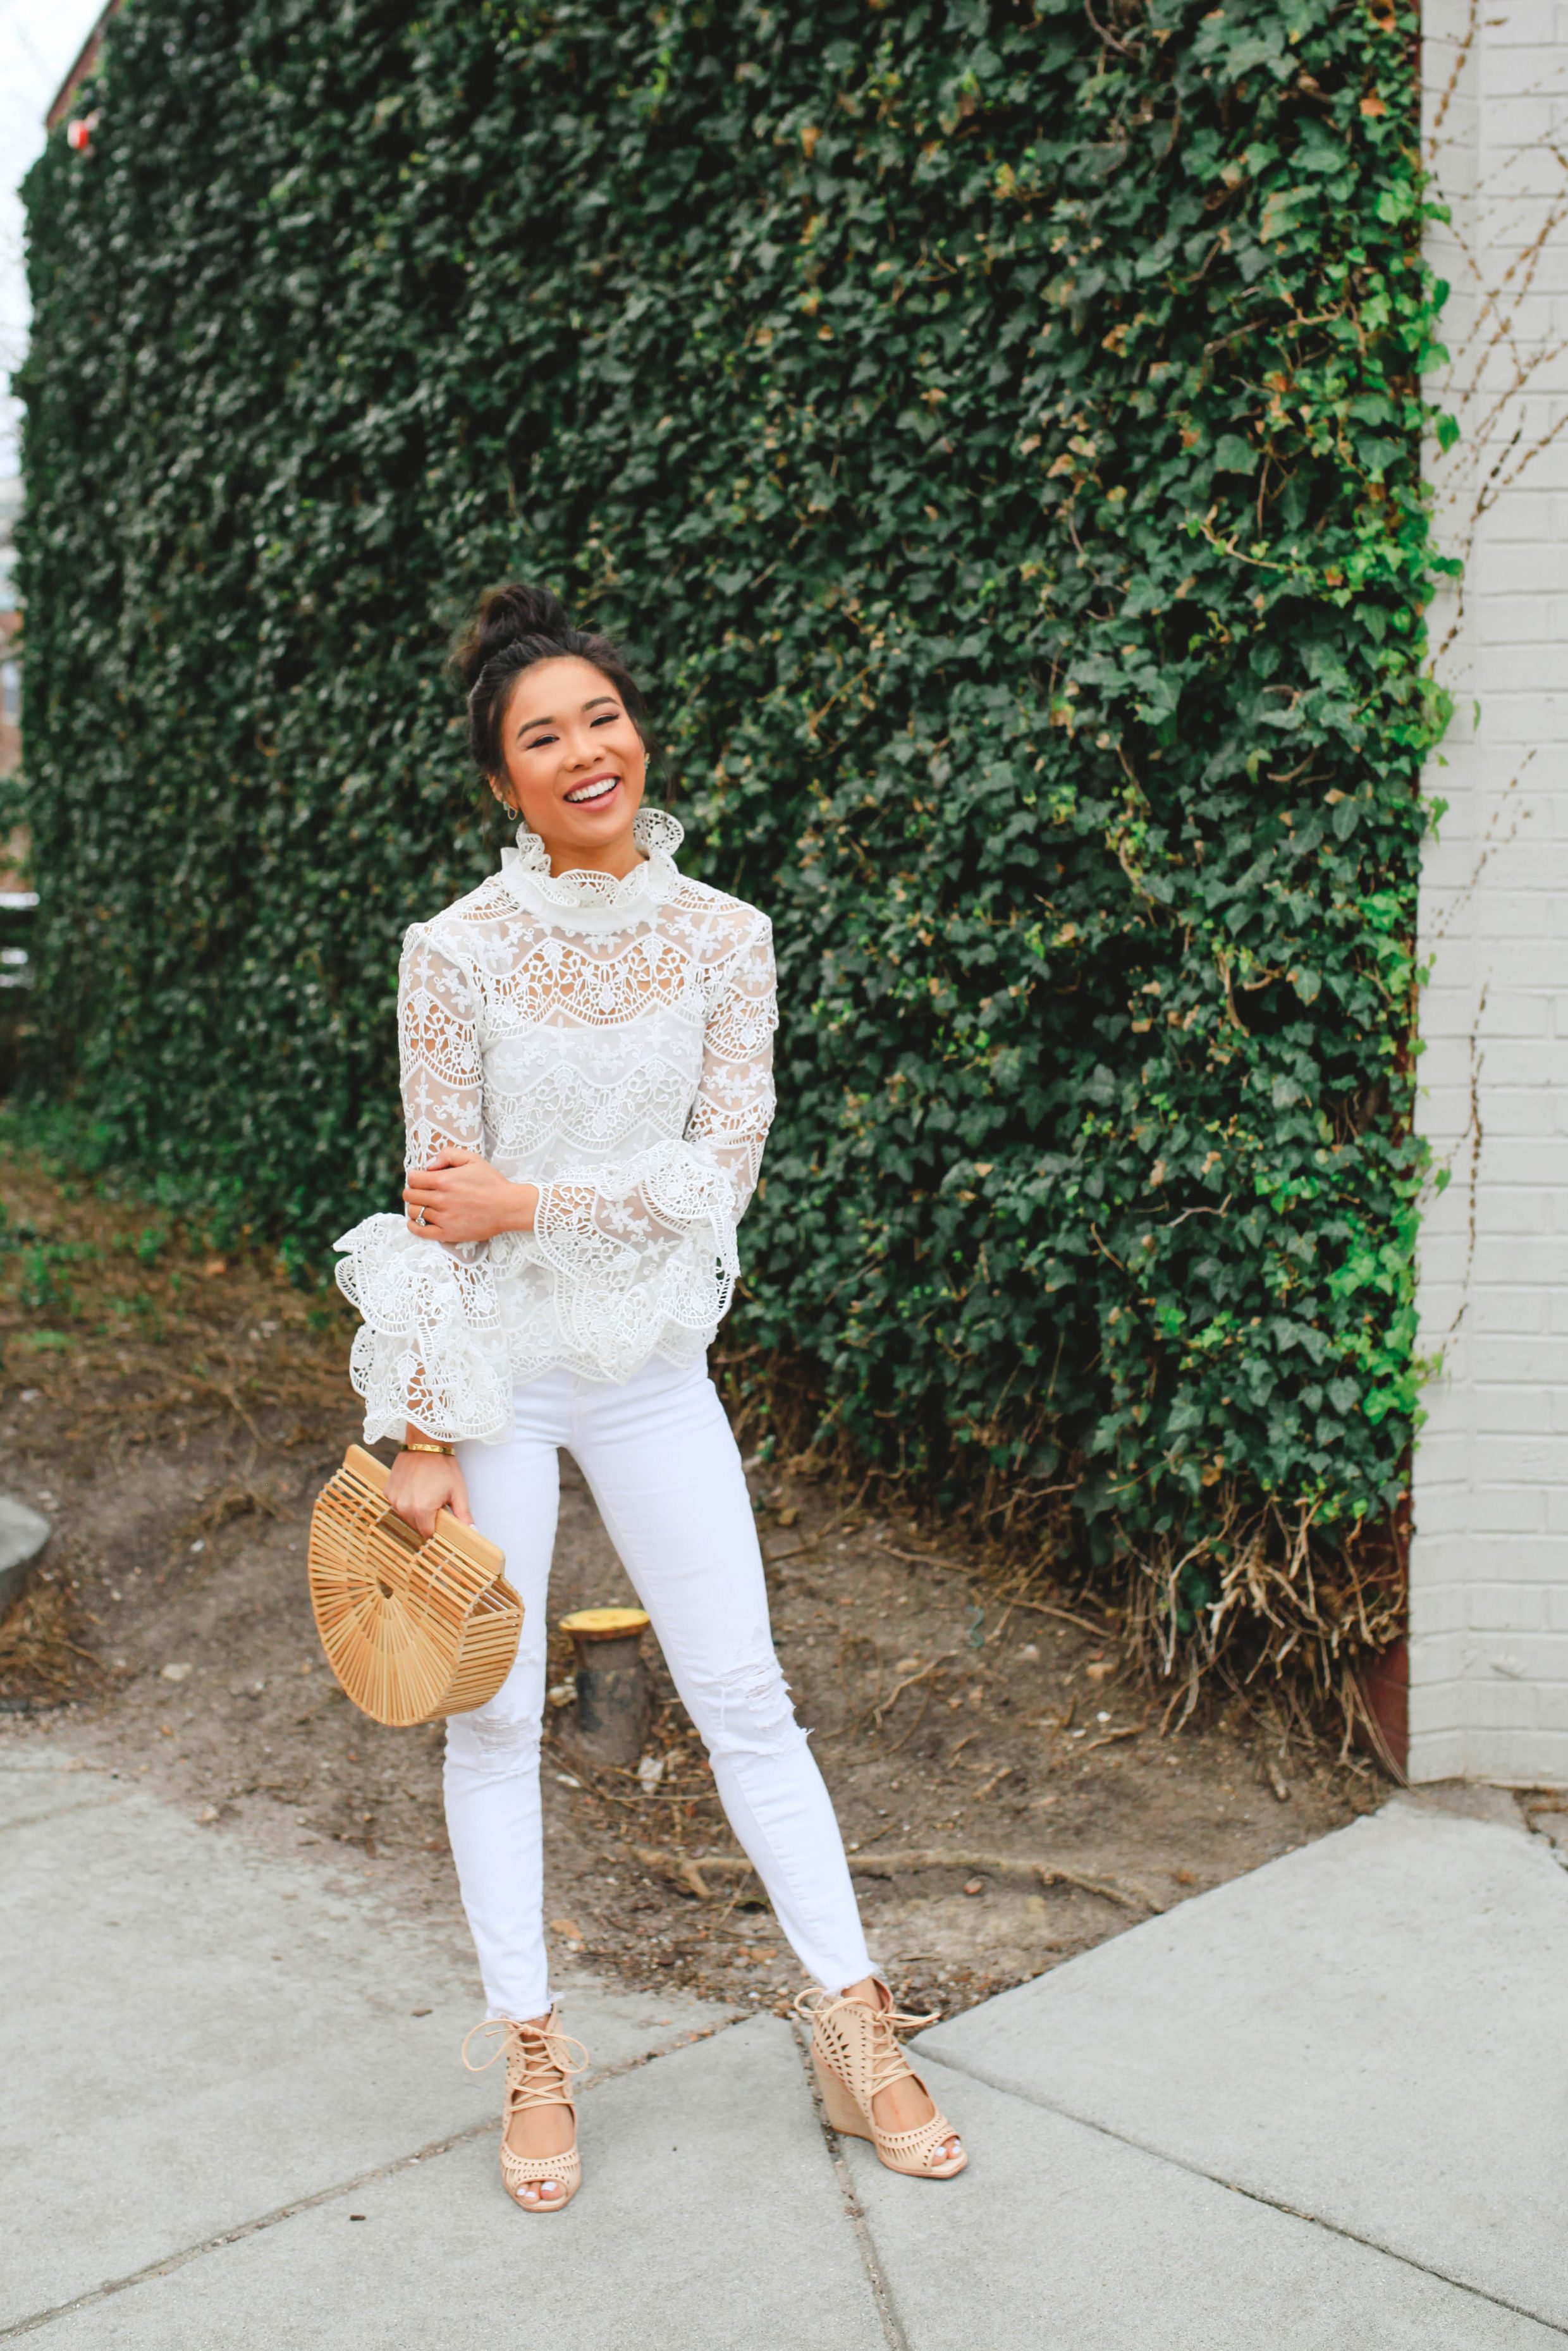 Hoang-Kim Cung wears a lace crochet top with white jeans and Cult Gaia Ark bag